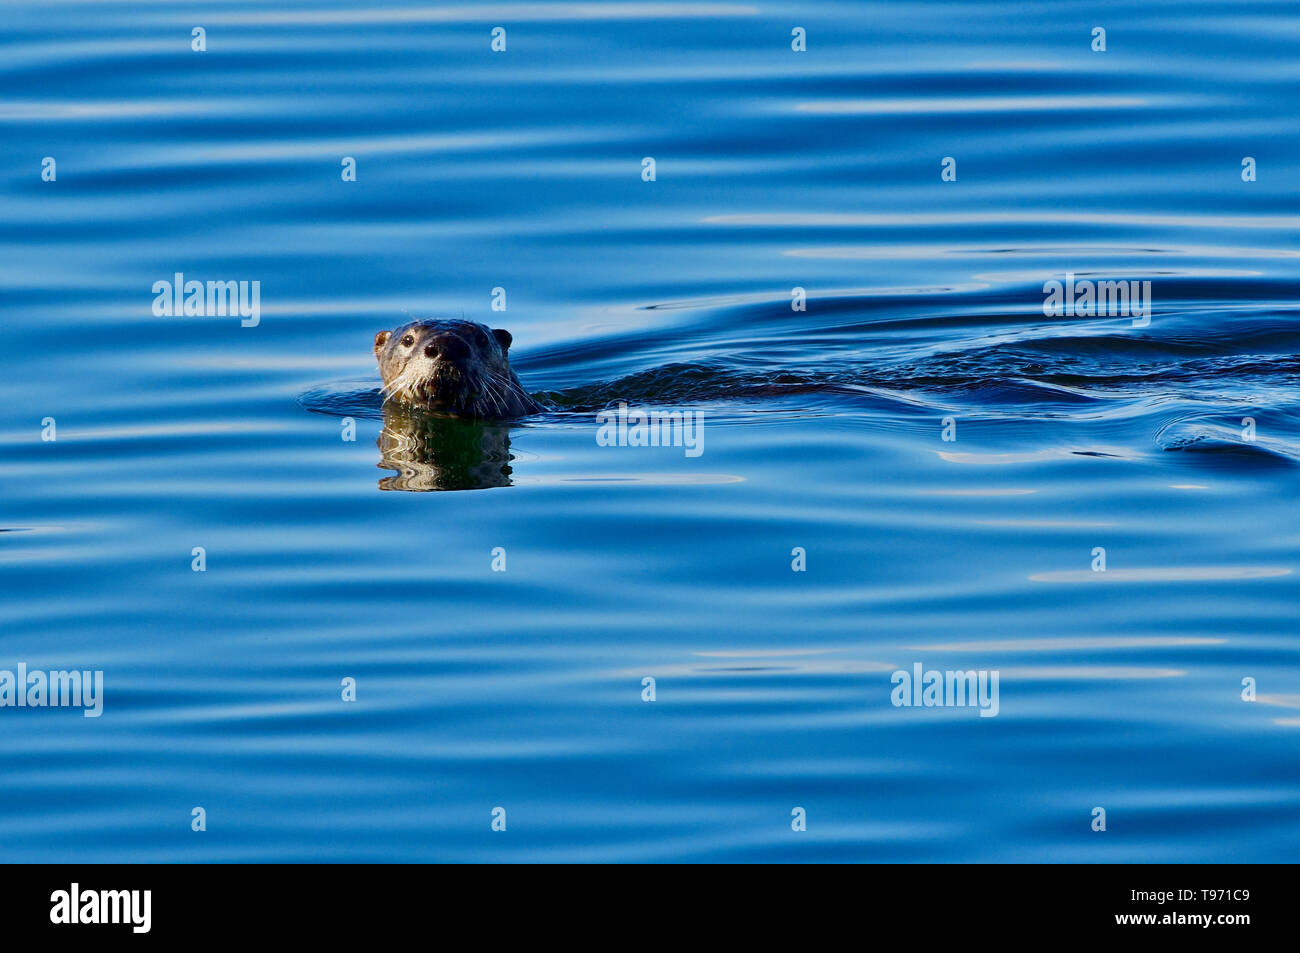 A river otter 'Lutra canadensis', swimming in the blue waters of the Stewart Channel off the coast of Vancouver Island British Columbia Canada Stock Photo